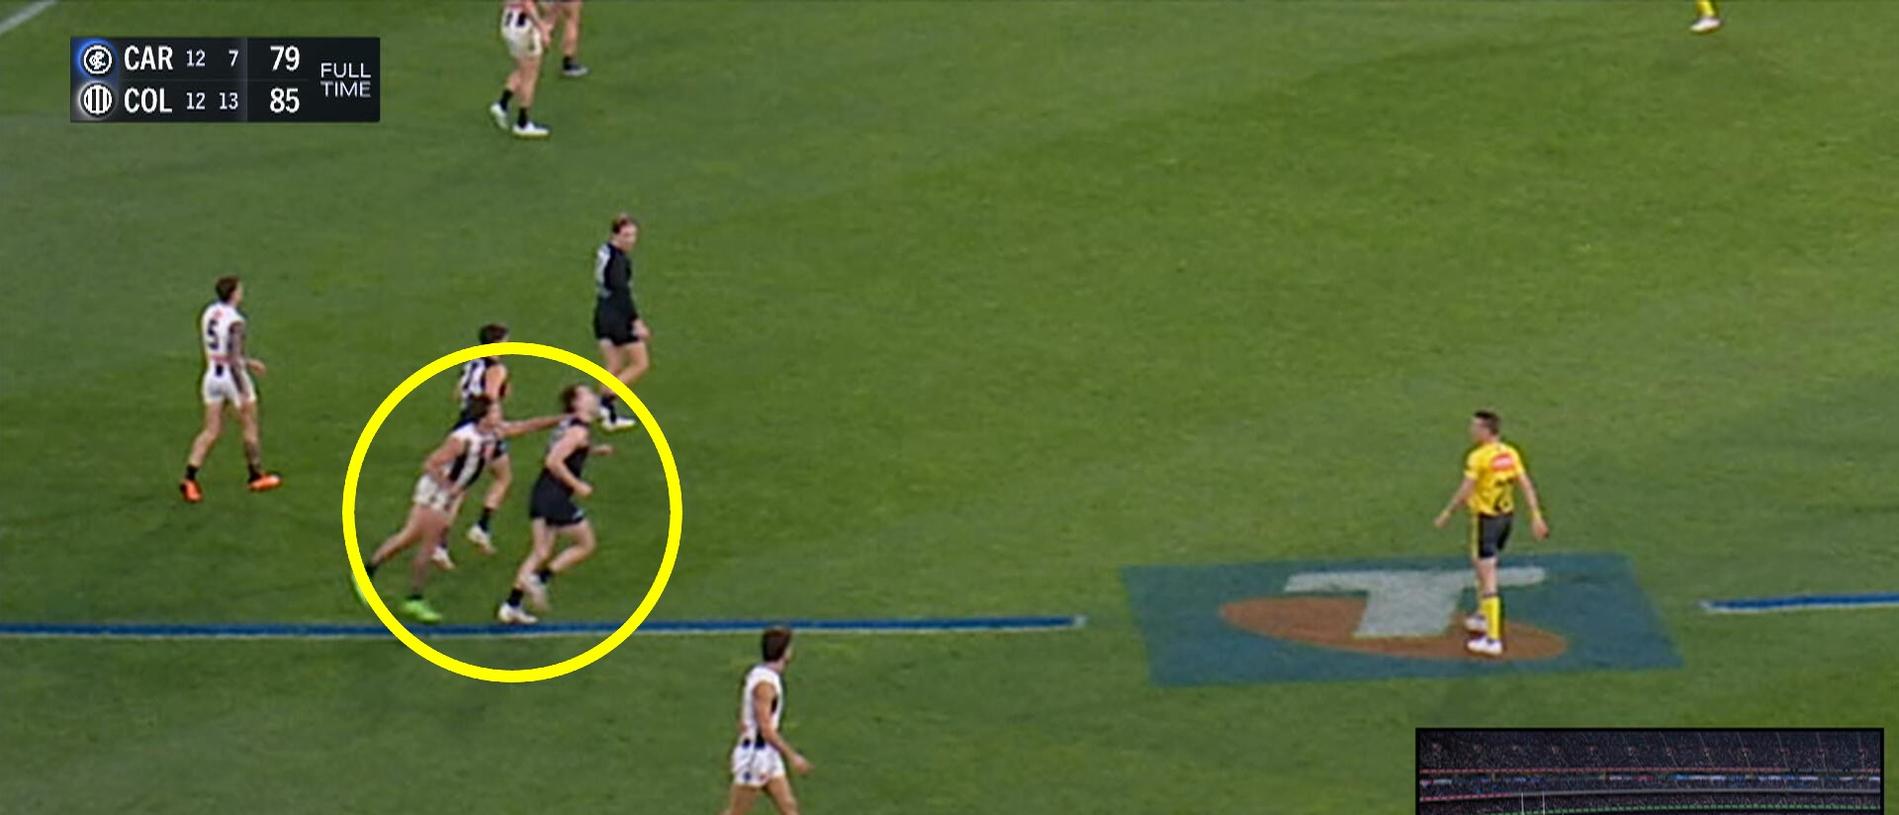 Collingwood recruit Lachie Schultz is set to come under scrutiny from the MRO for a brain fade strike to Carlton’s Blake Acres during Friday night’s clash.